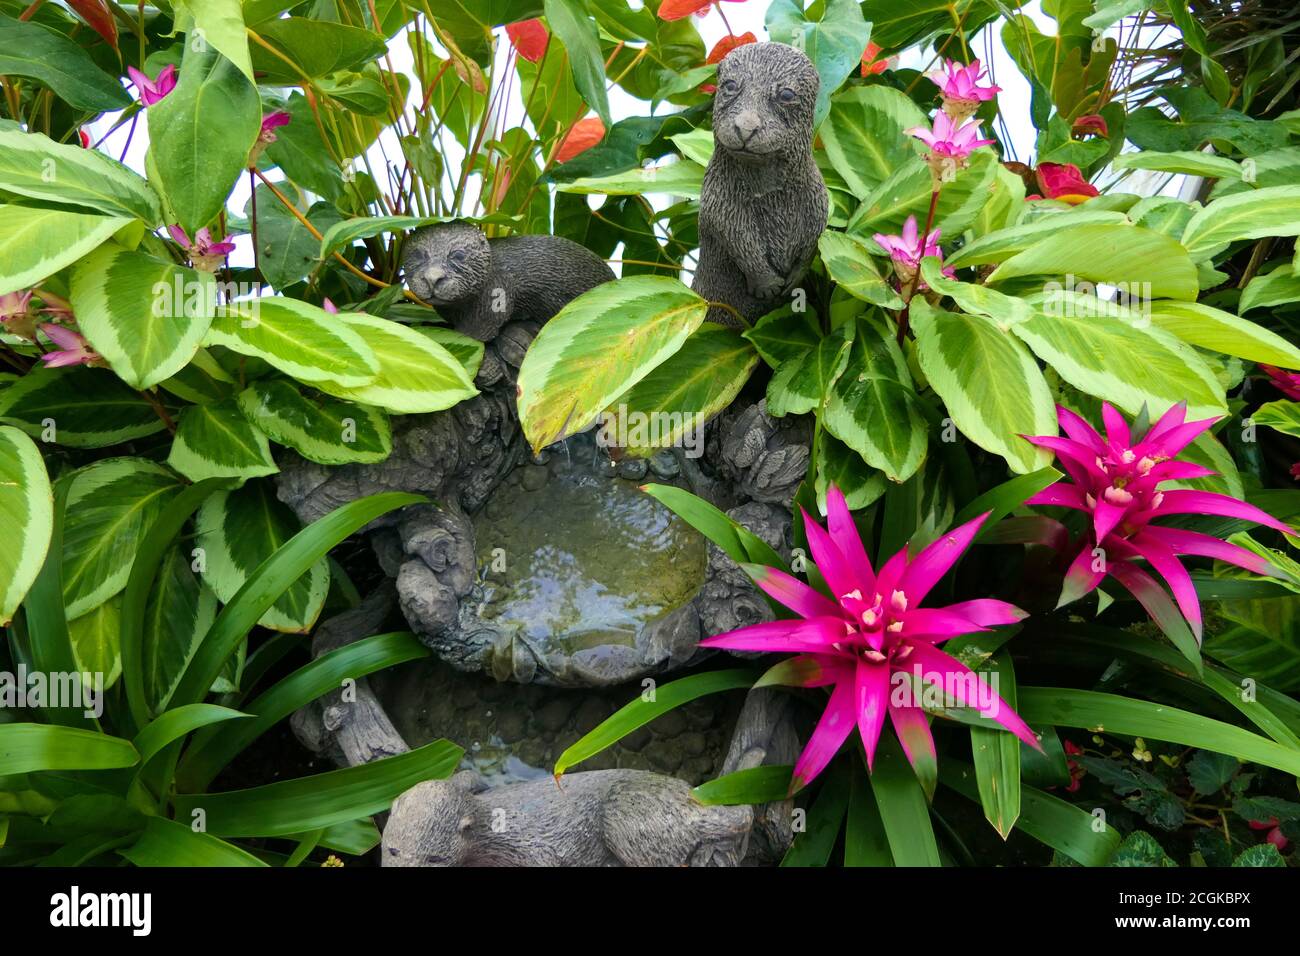 Closeup decorative garden with a small stony fountain and stone figurine in the middle of beautiful flowers and leaves Stock Photo